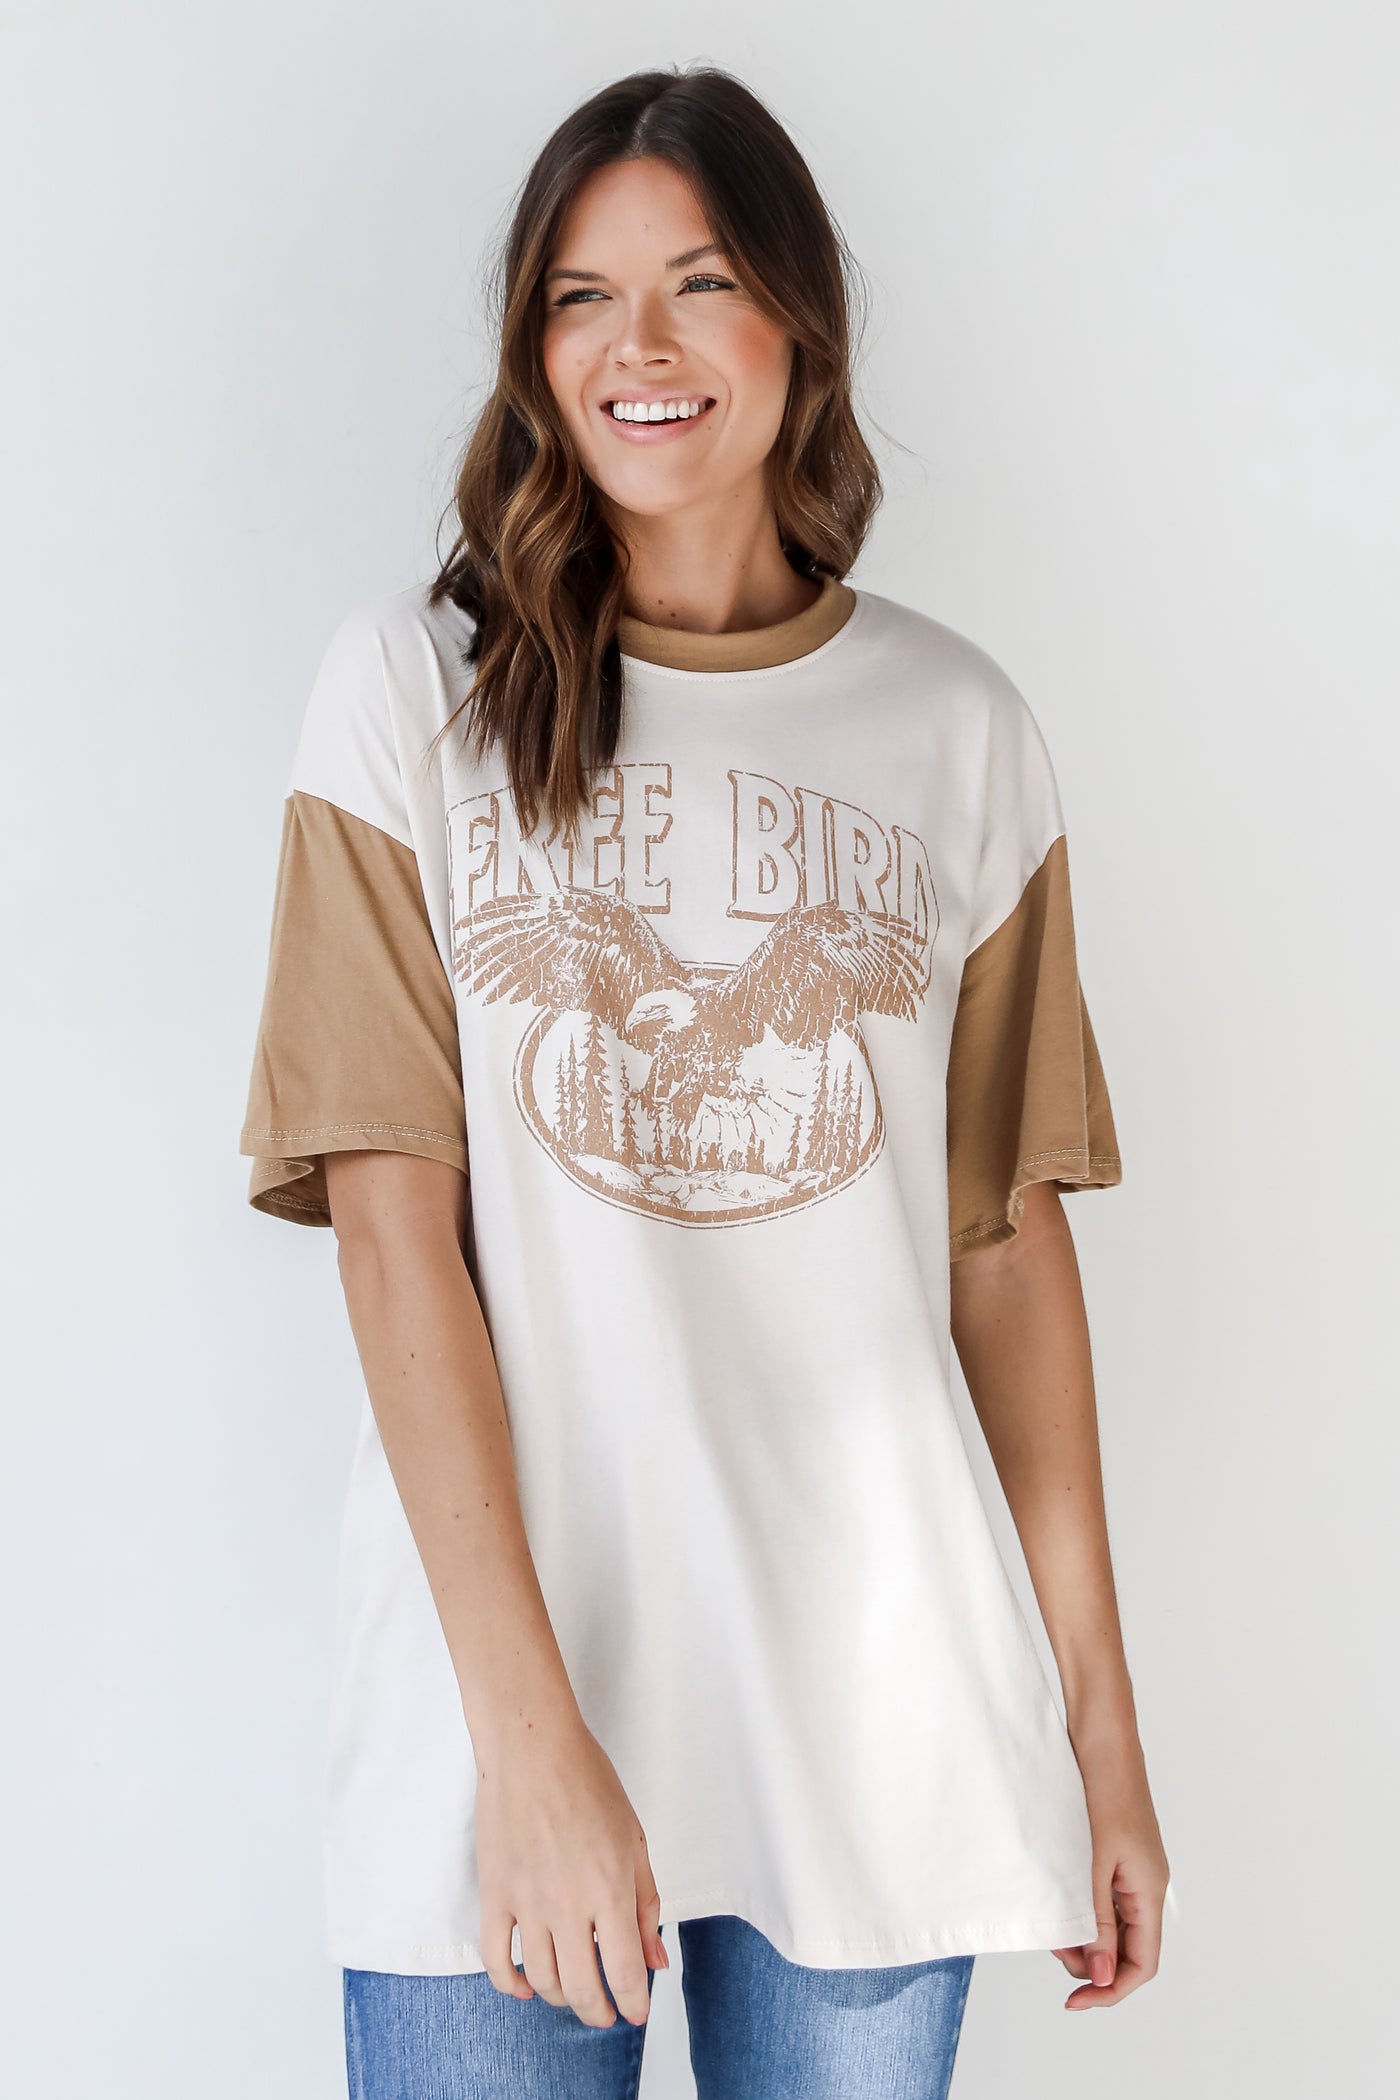 Free Bird Graphic Tee from dress up